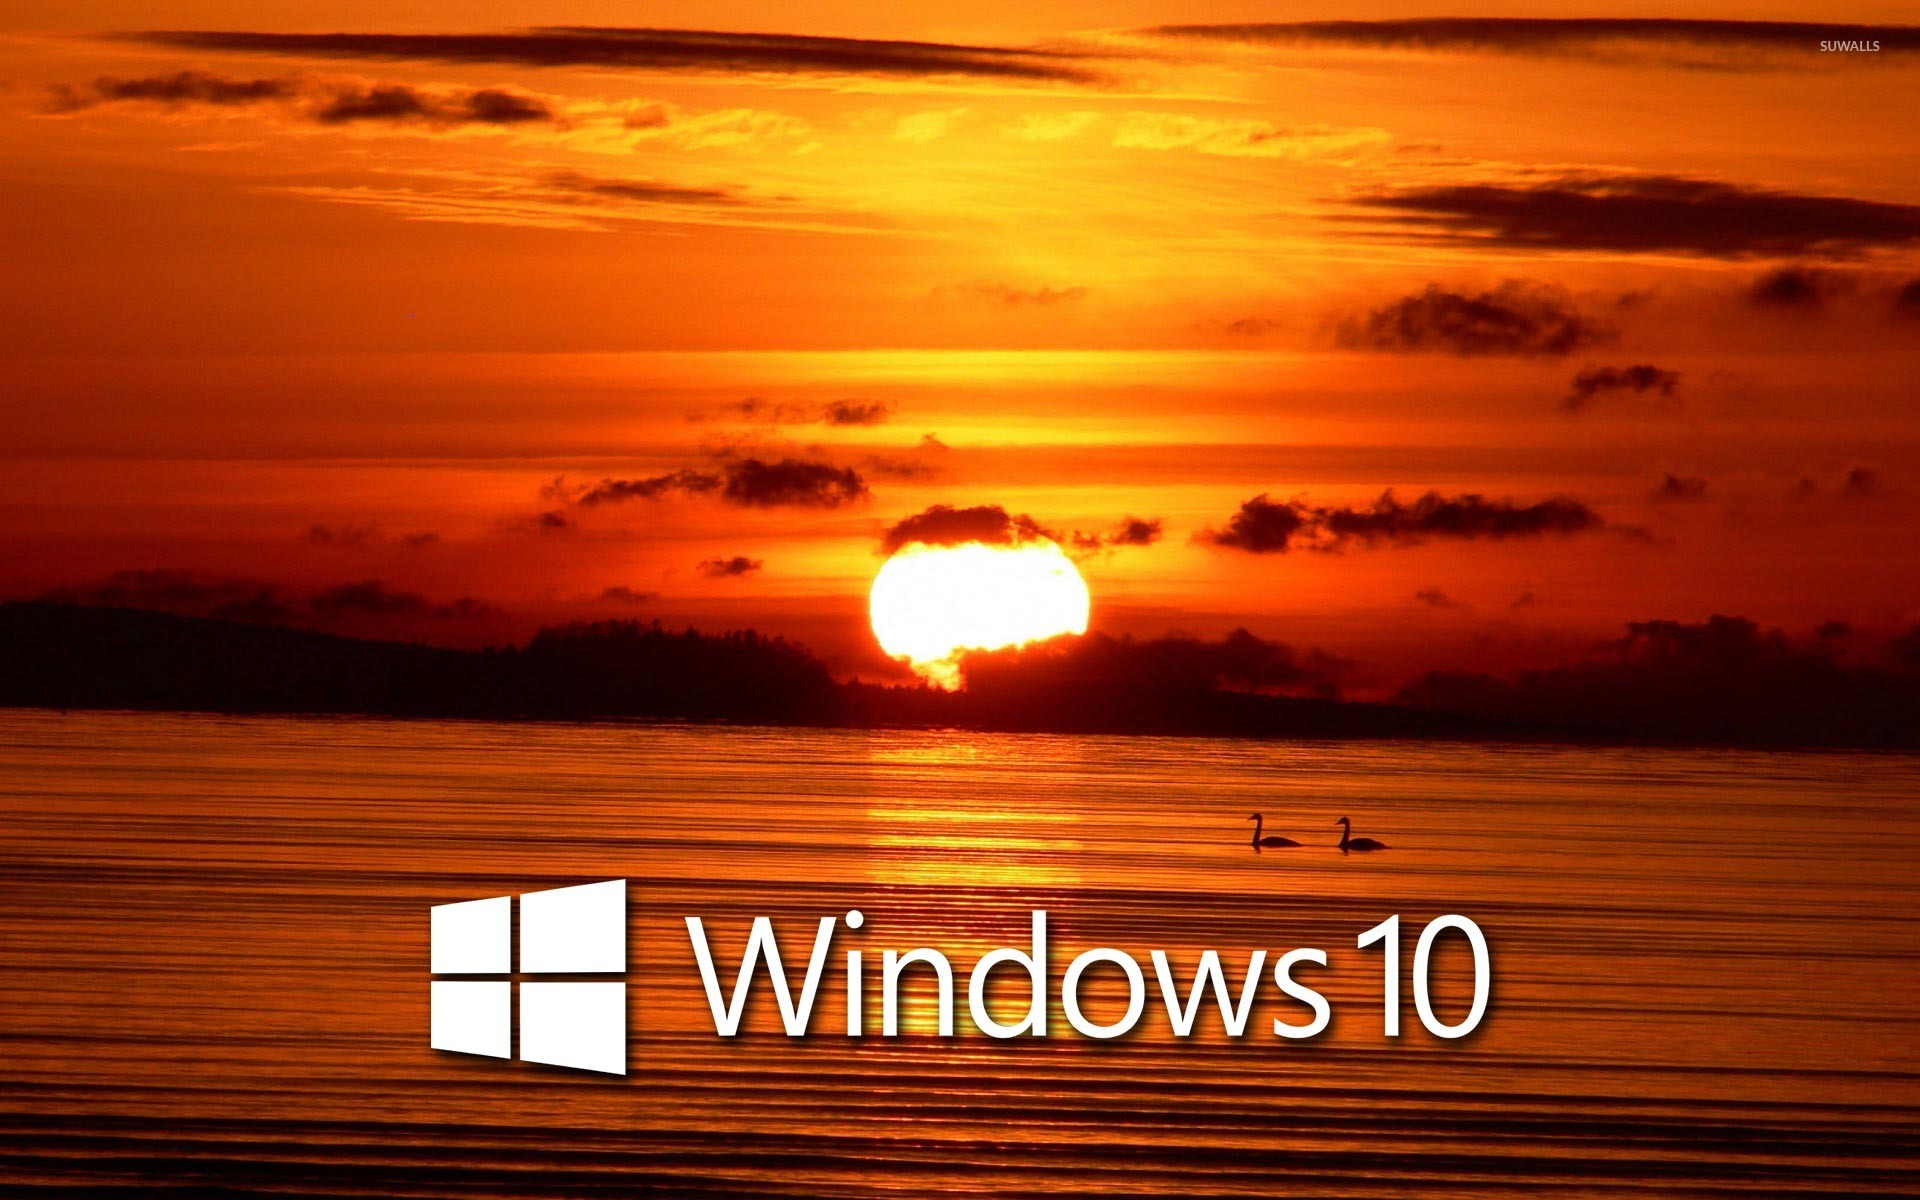 Windows 10 Over The Sunset White Text Logo 2 Wallpaper Computer